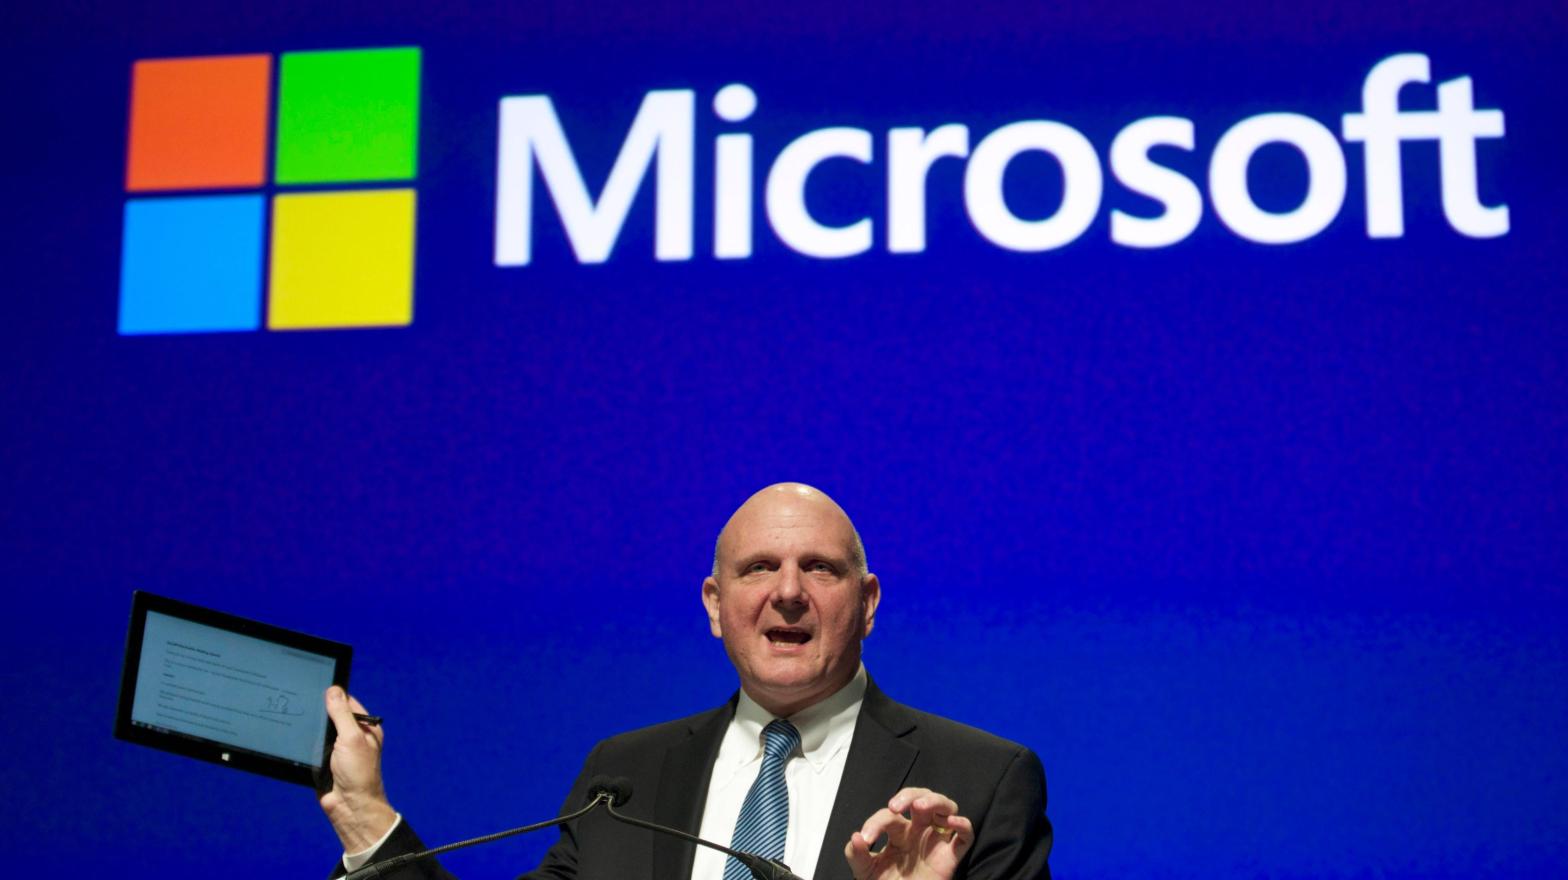 During his time as CEO from 2000 until 2014, Ballmer was a big proponent of the Surface and led Microsoft away from the smartphone boom — a decision that strained his relationship with founder Bill Gates.  (Image: Stephen Brashear, Getty Images)